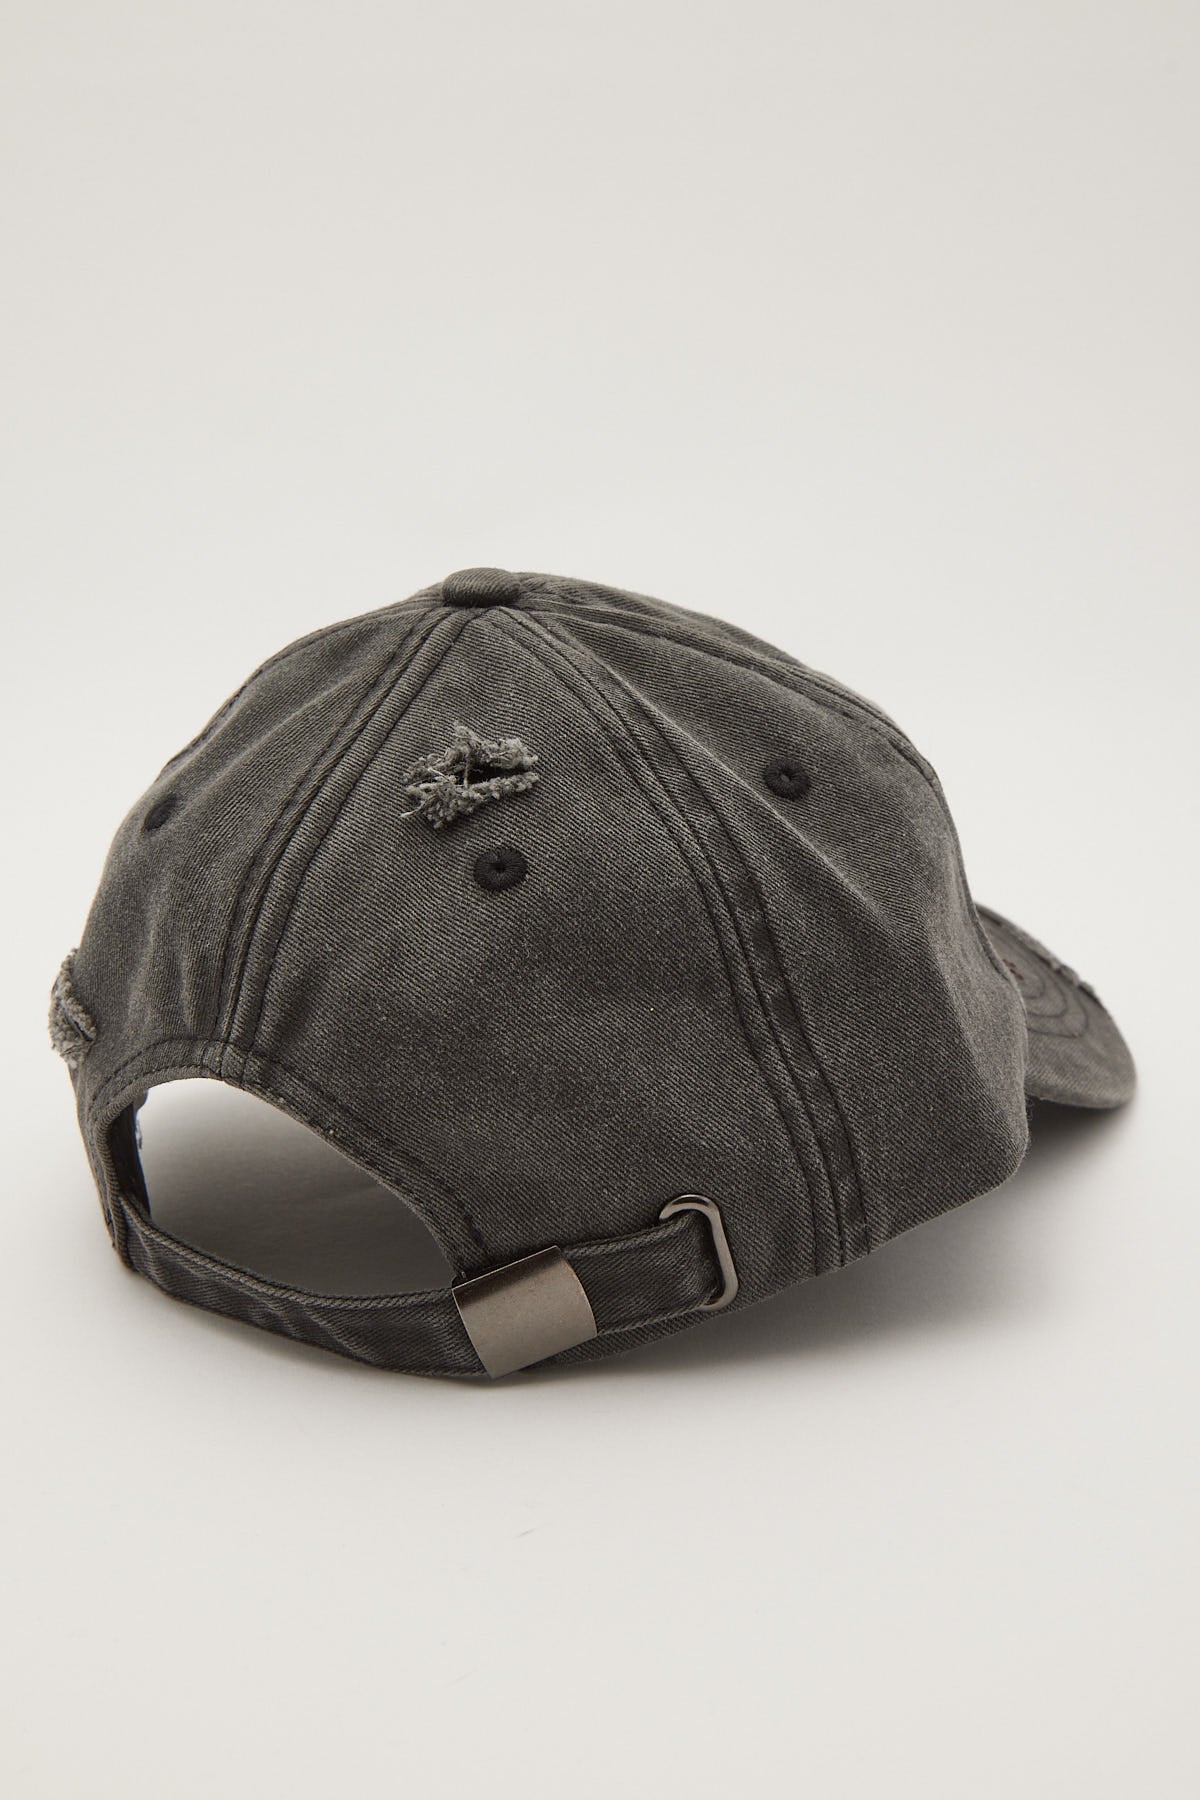 Neovision Asteroid Distressed Washed Cap Black